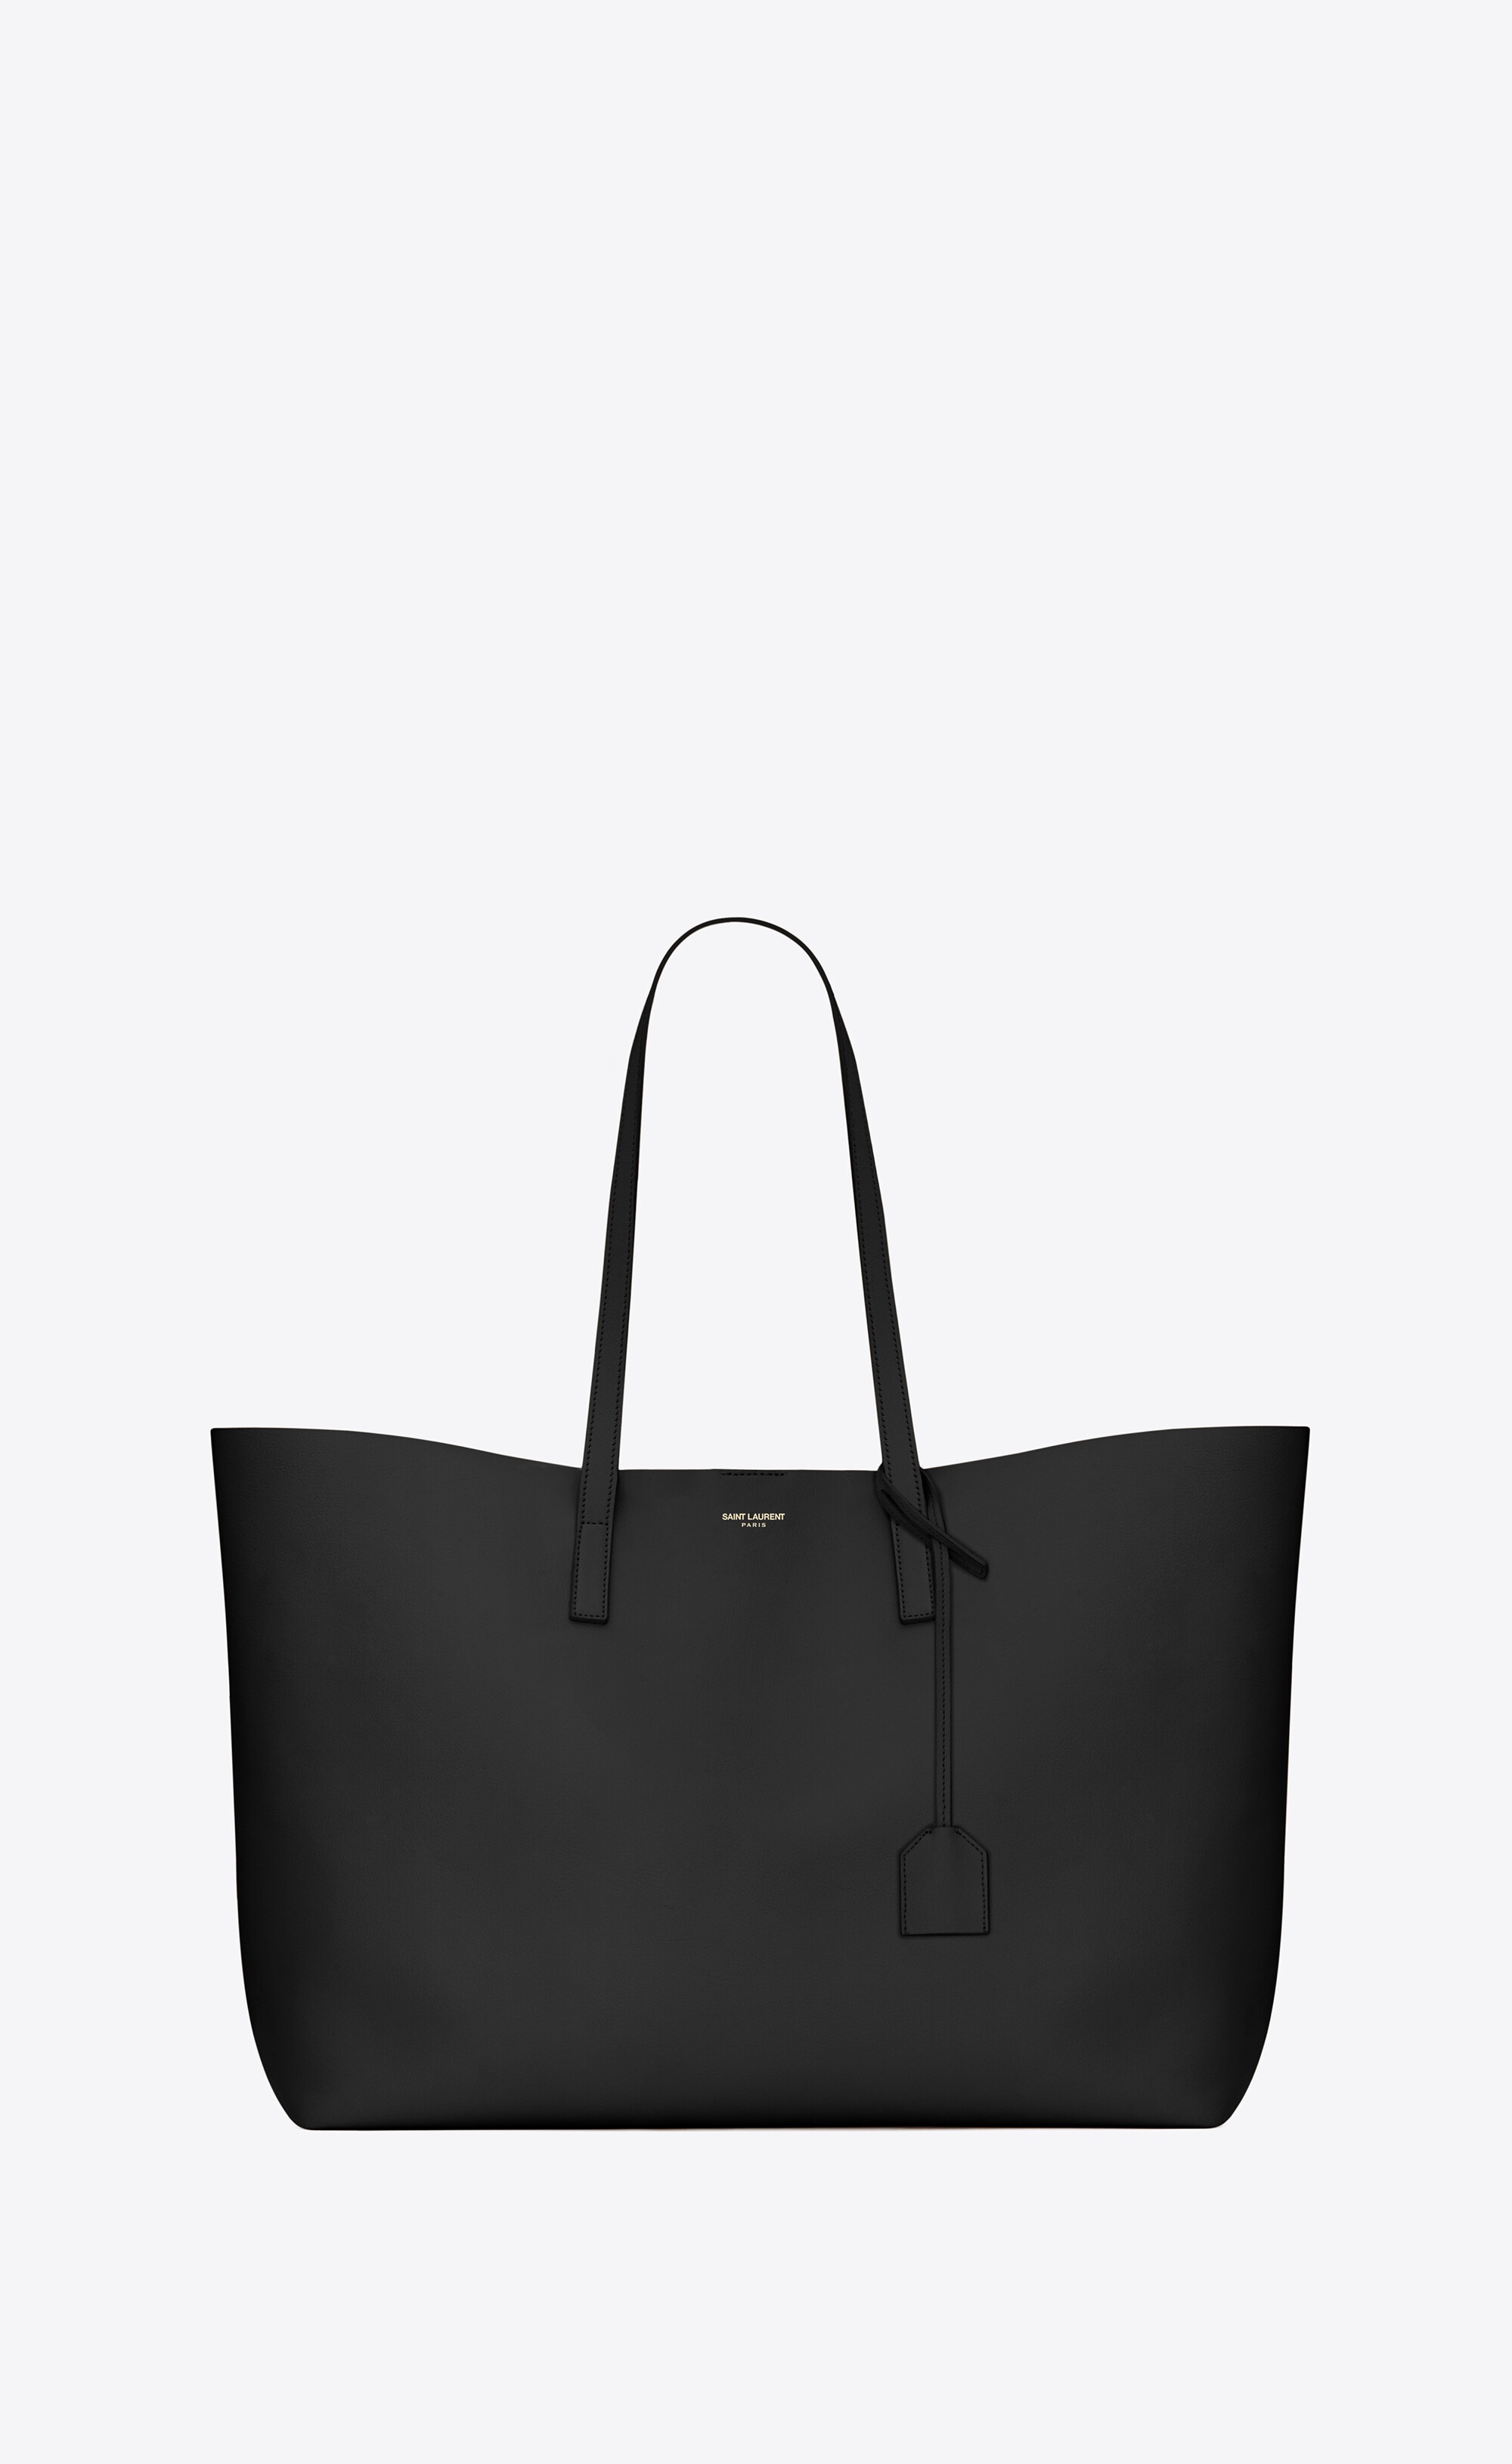 shopping saint laurent e/w in supple leather - 1